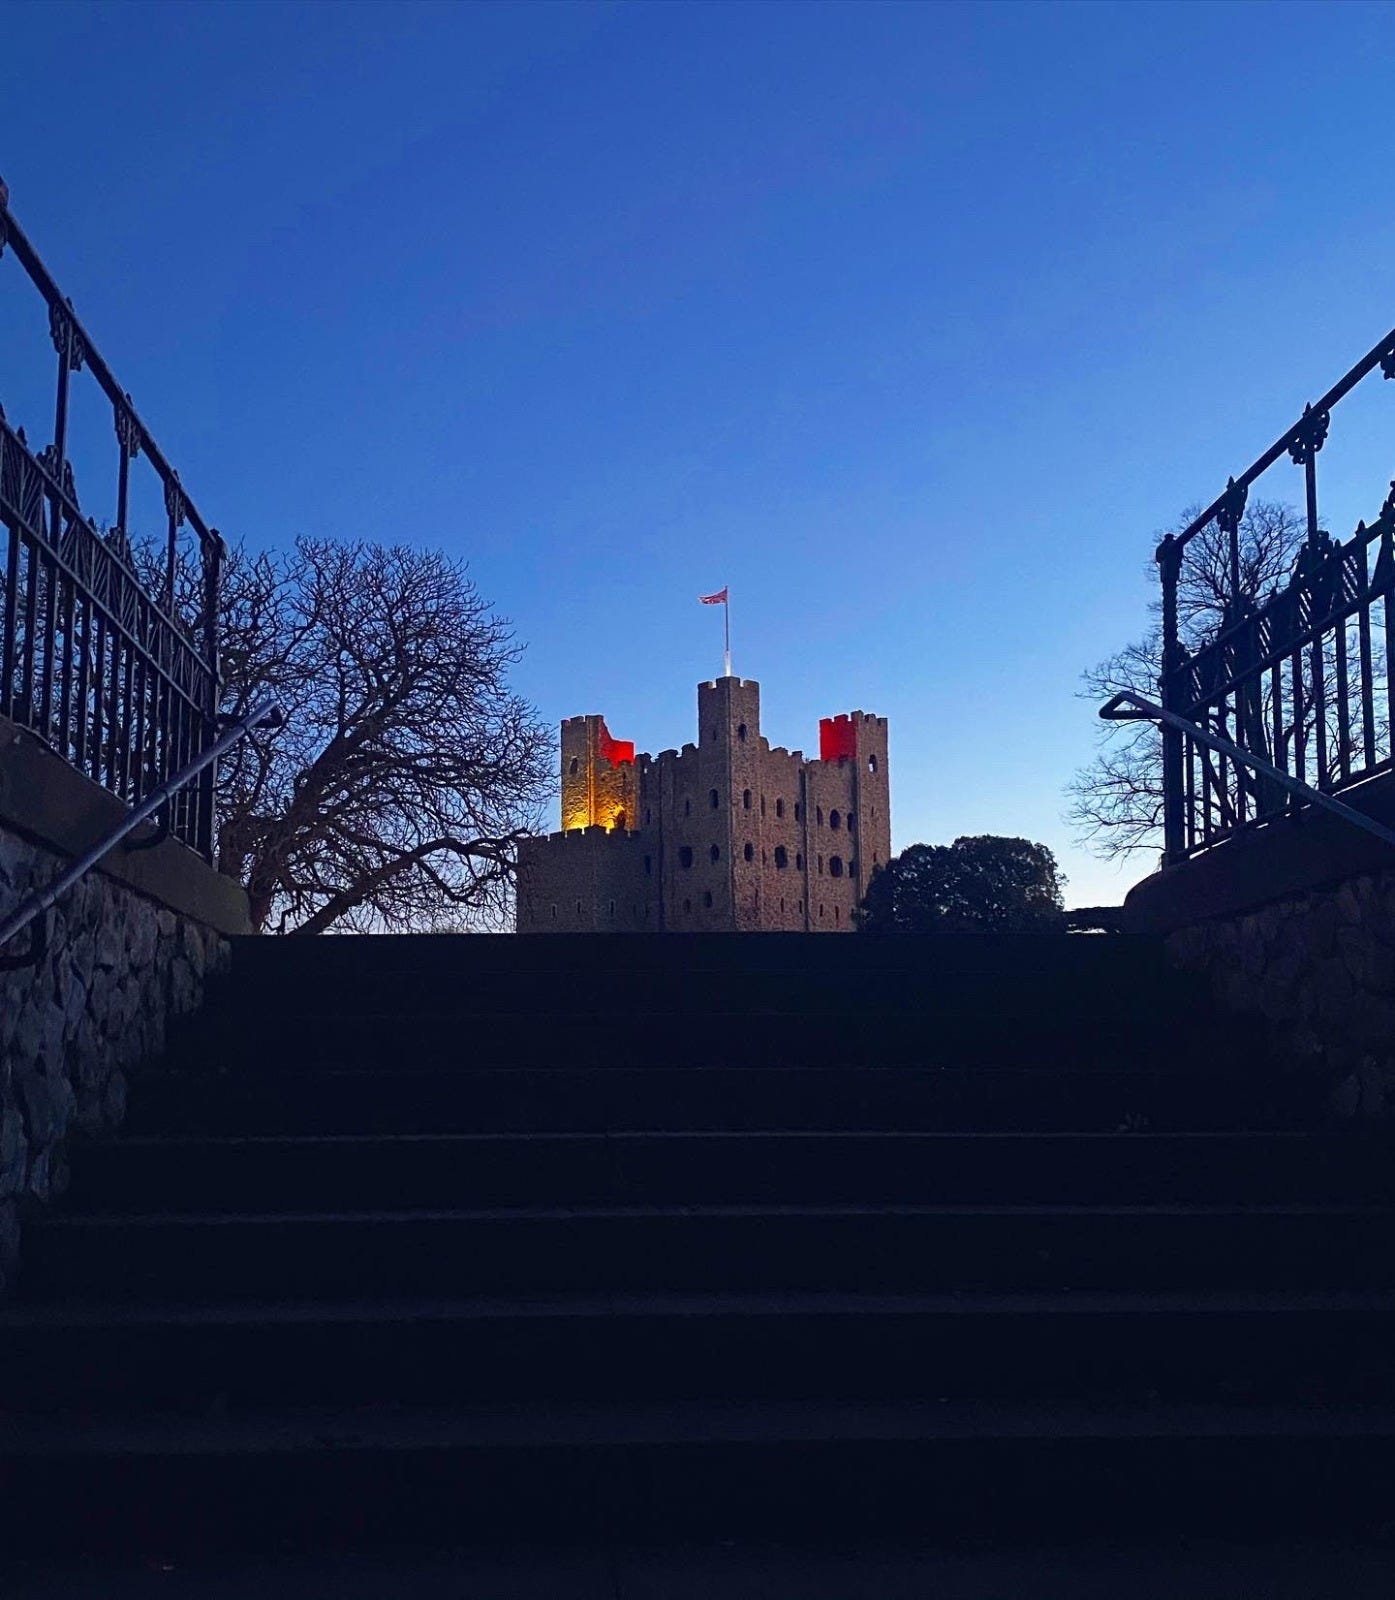 The stairs leading up to Rochexter castle against a picturesque blue sky. It is early evening, when the sky begins to darken. There are trees either side of the castle. The castle itself is built of stone, and lit by a soft red light.